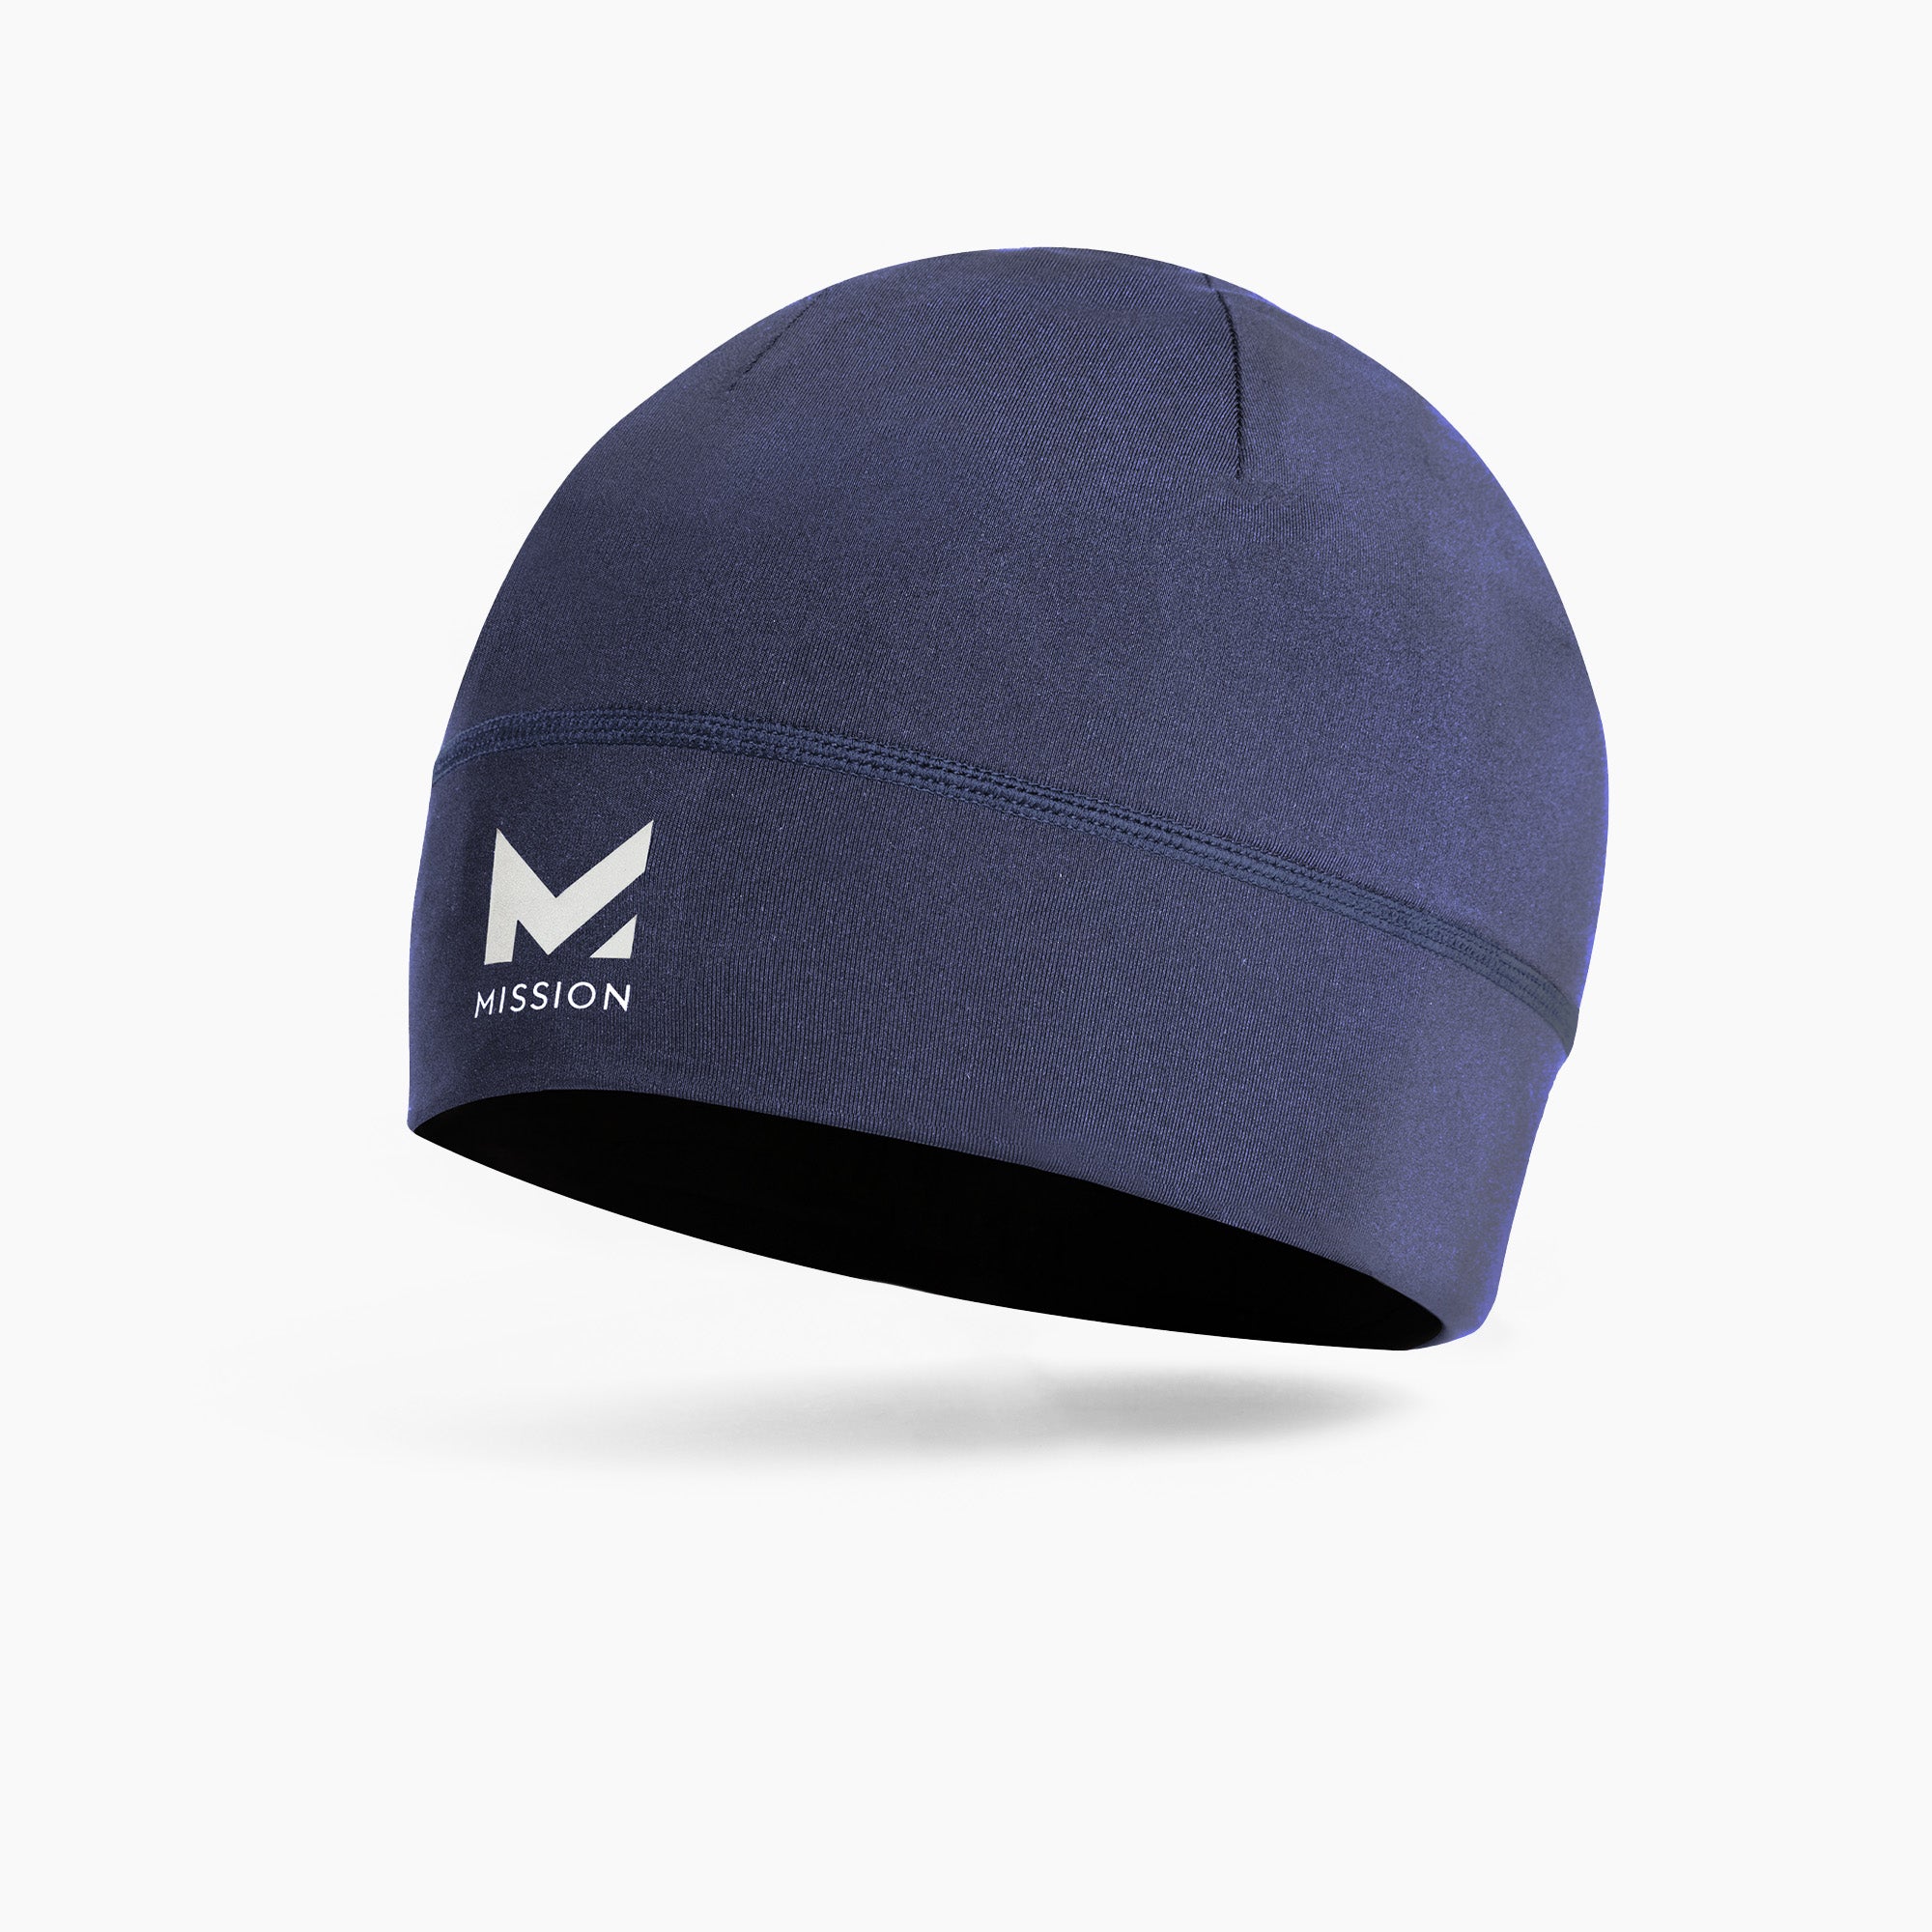 MISSION Beanie – Performance Jersey